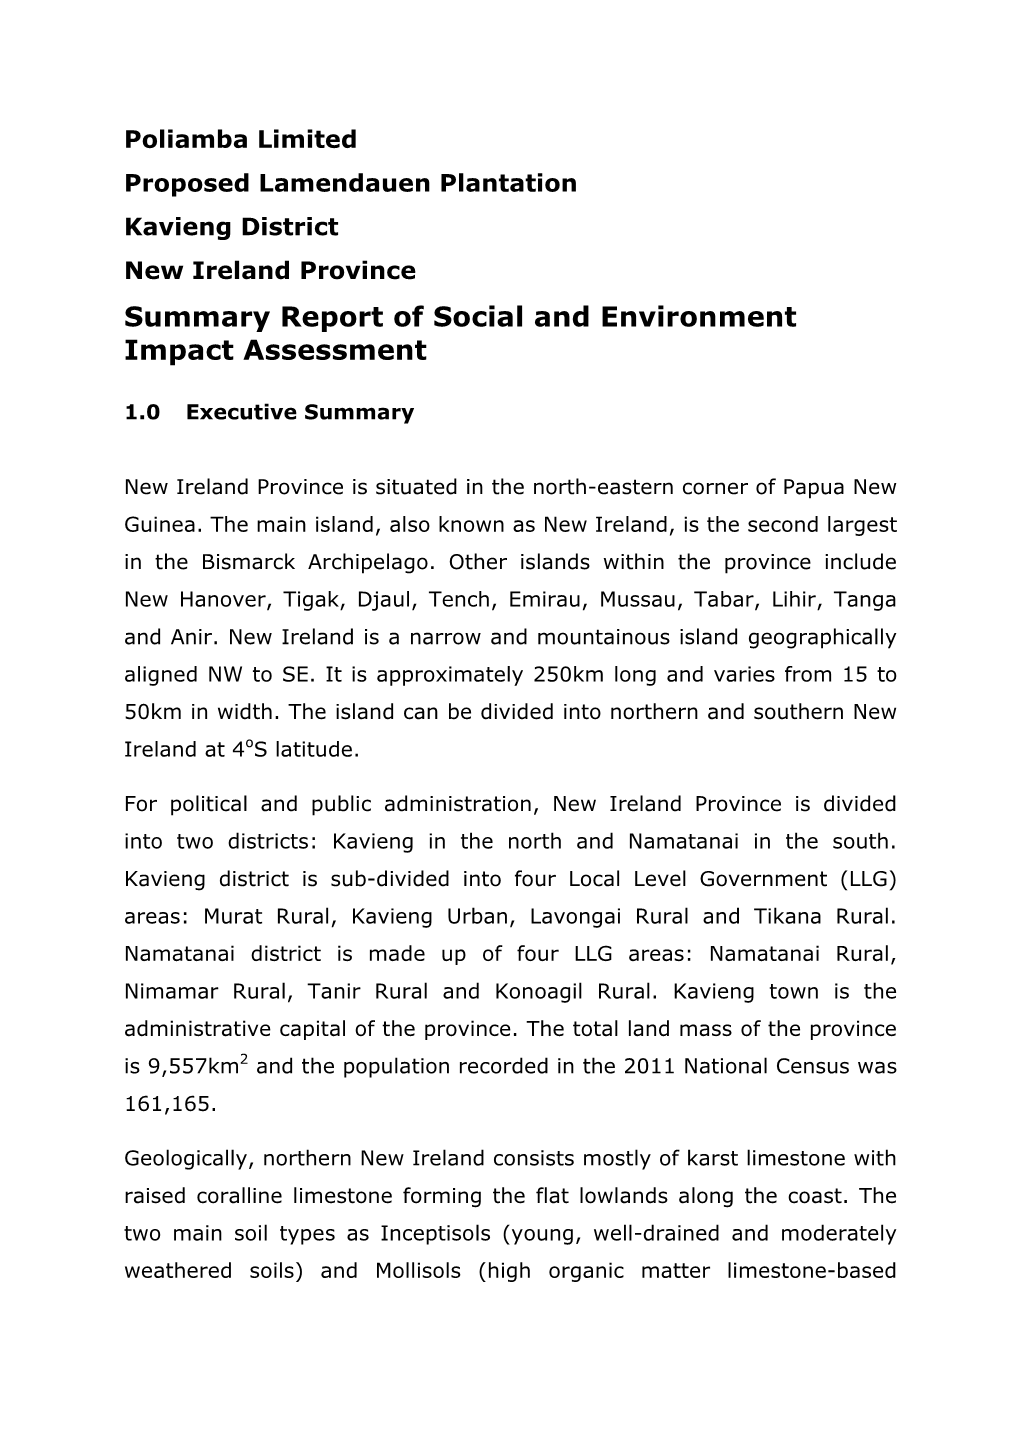 Summary Report of Social and Environment Impact Assessment